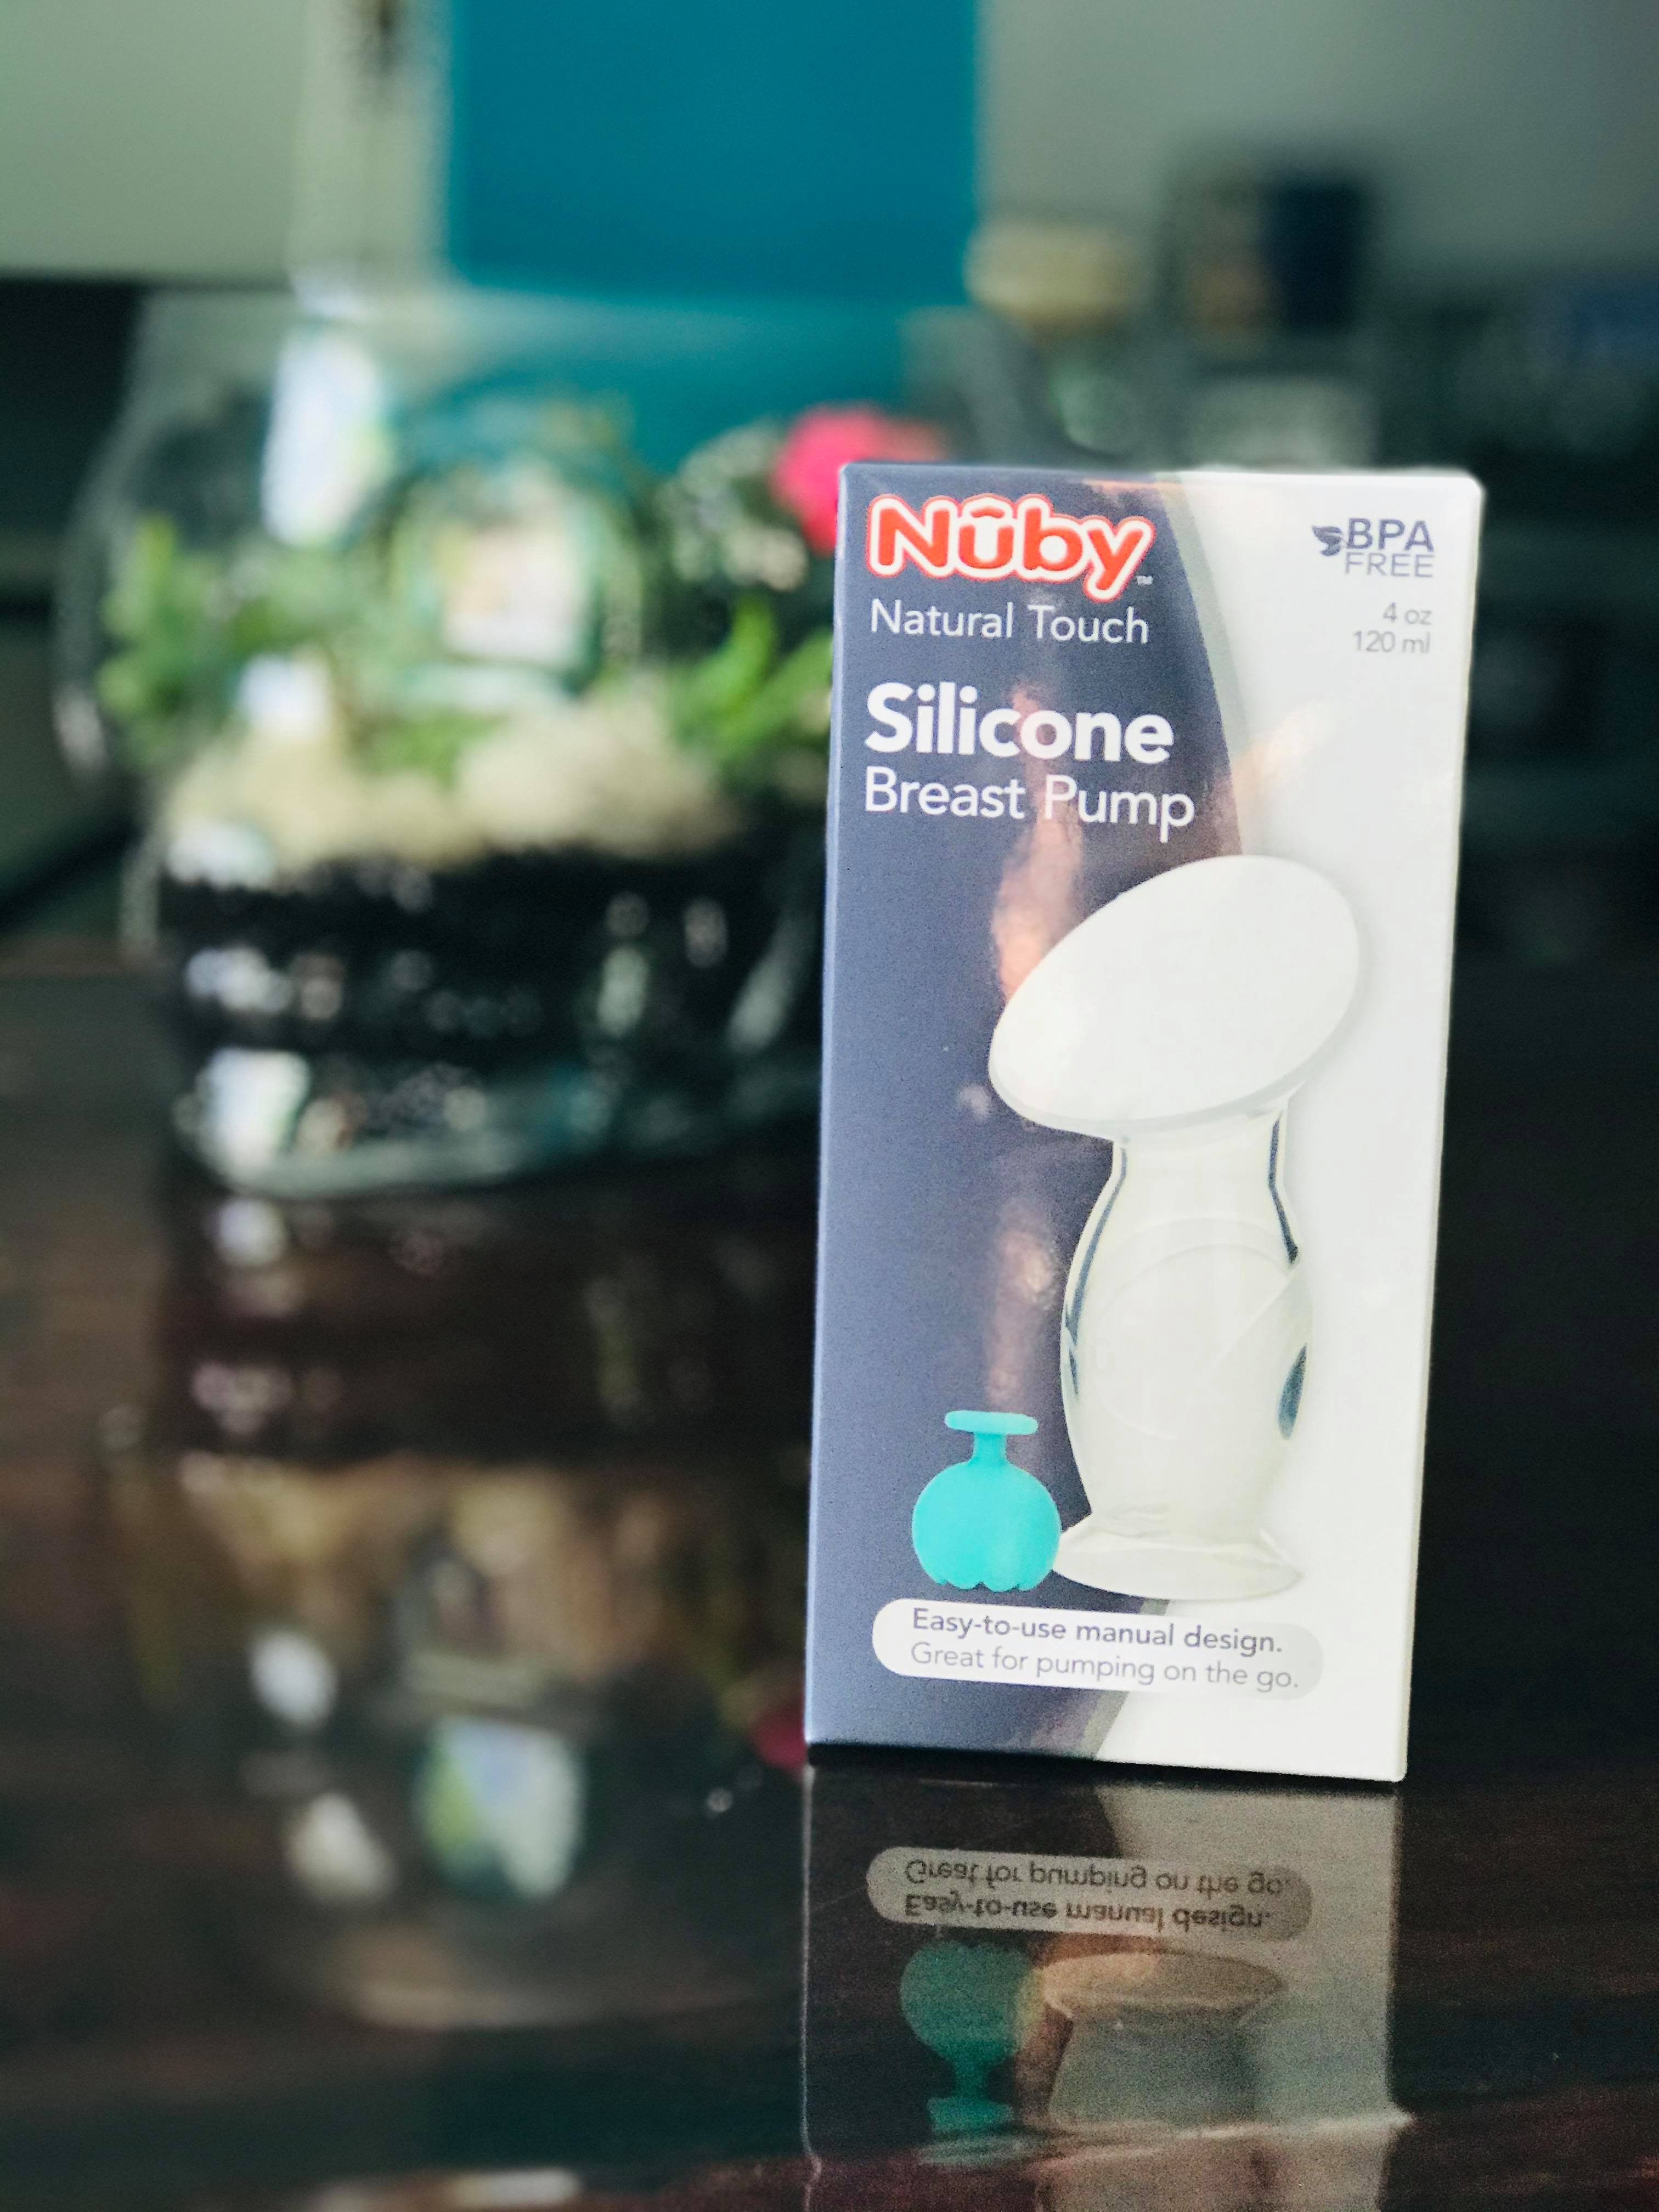 Nuby Silicone Breast Pump Review and Giveaway!